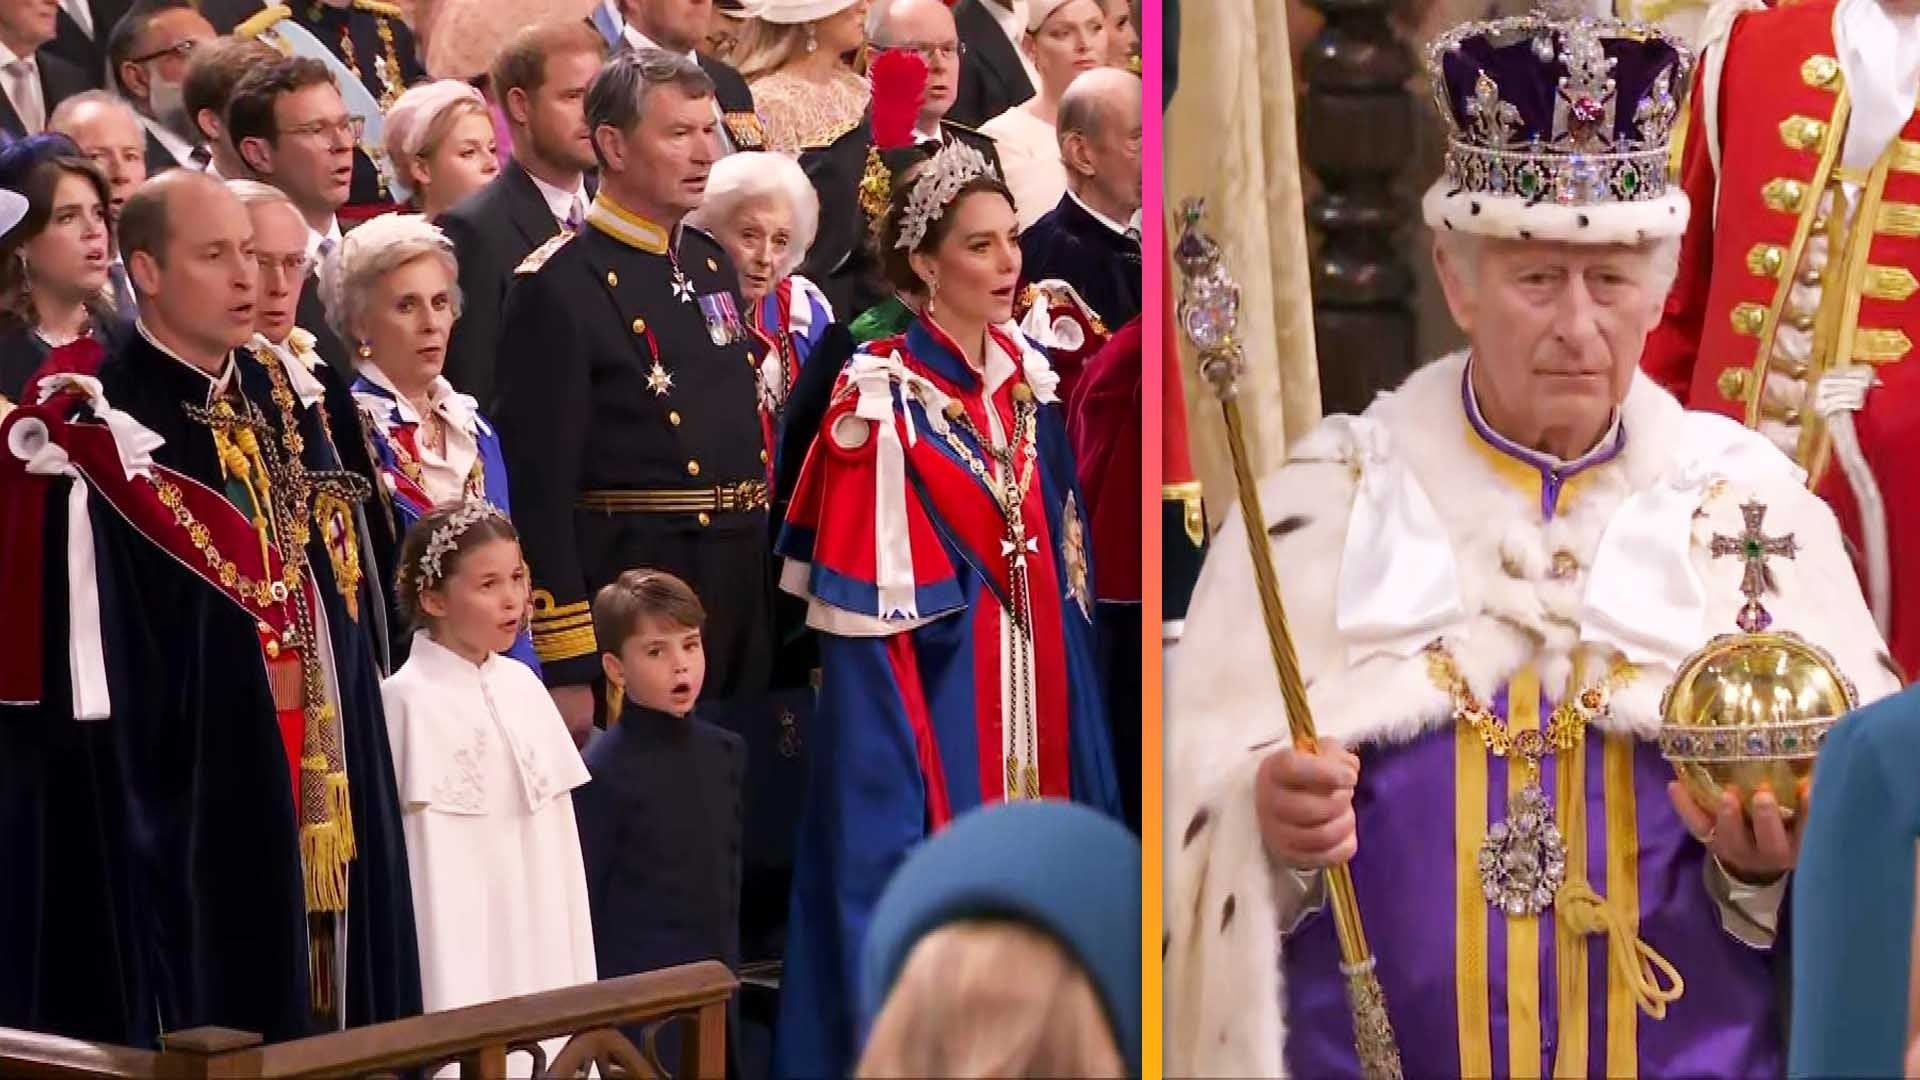 Watch Royal Family Sing ‘God Save the King’ as Charles Makes Procession